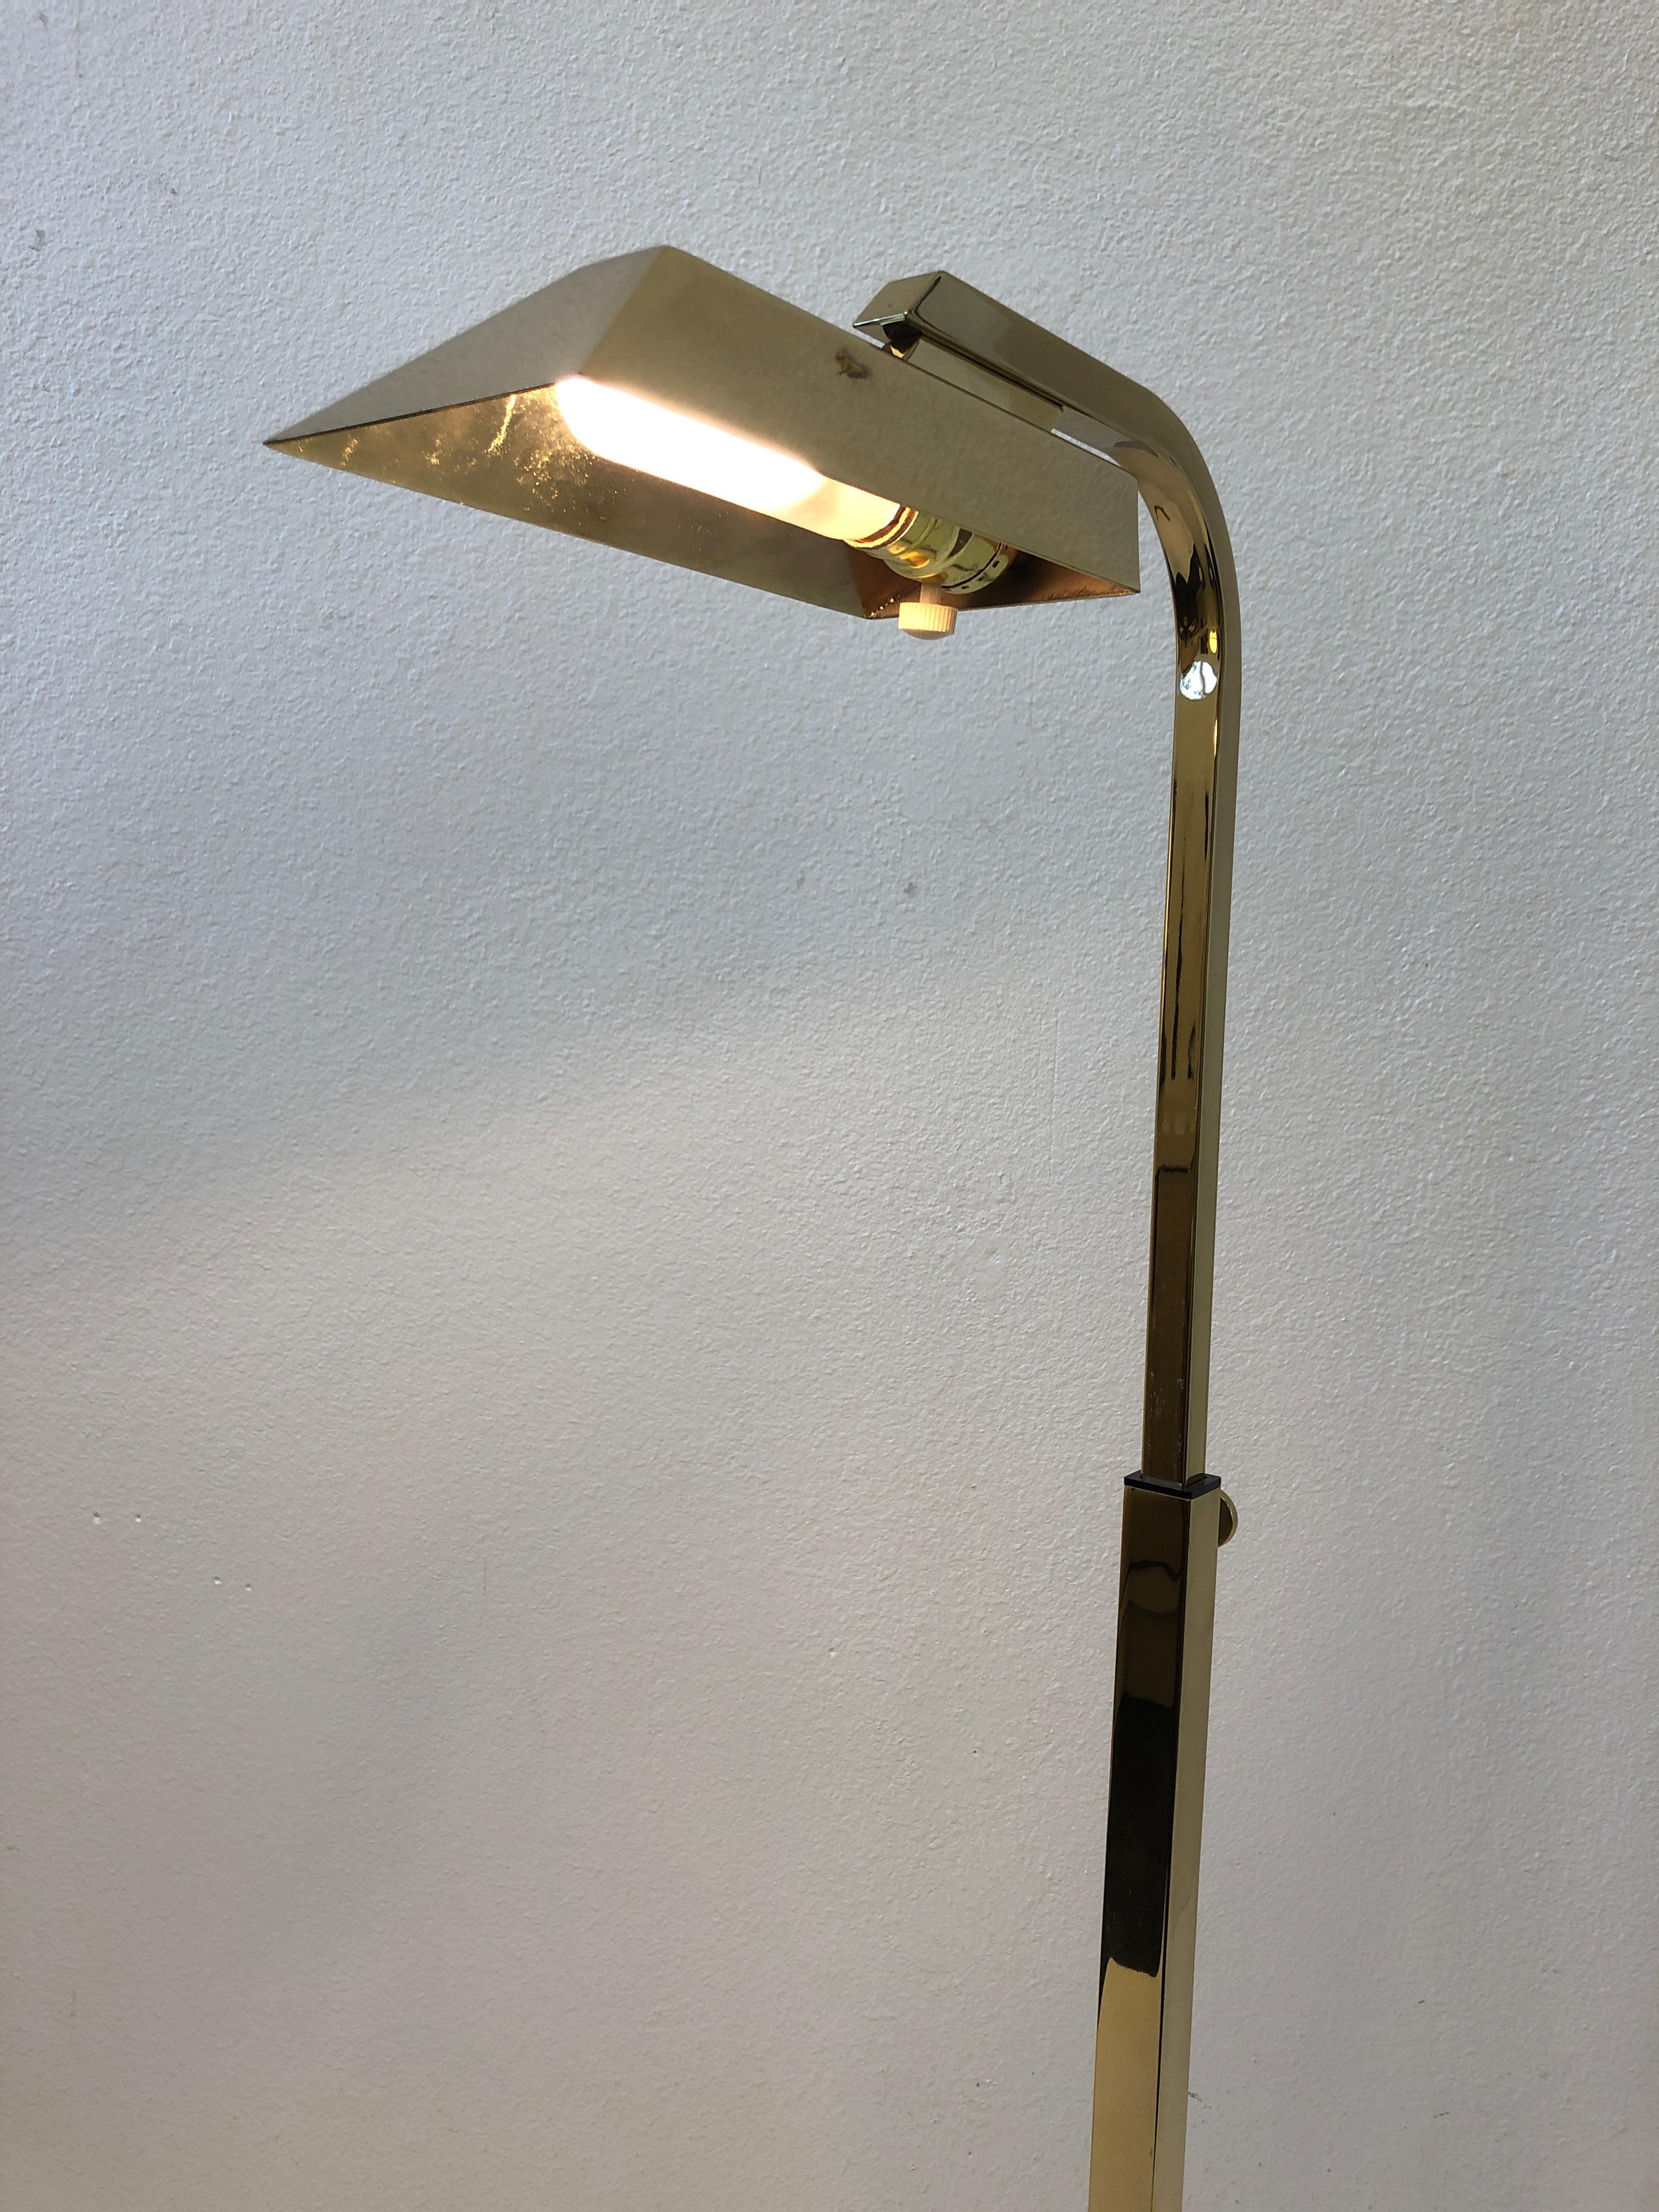 A glamorous pair of adjustable polish brass reading V-lamps designed by Charles Hollis Jones in the 1970. The lamps have been newly rewired. The lamps can bee adjusted up and down.
Overall dimensions: 17” wide, 17” deep, 45” high.